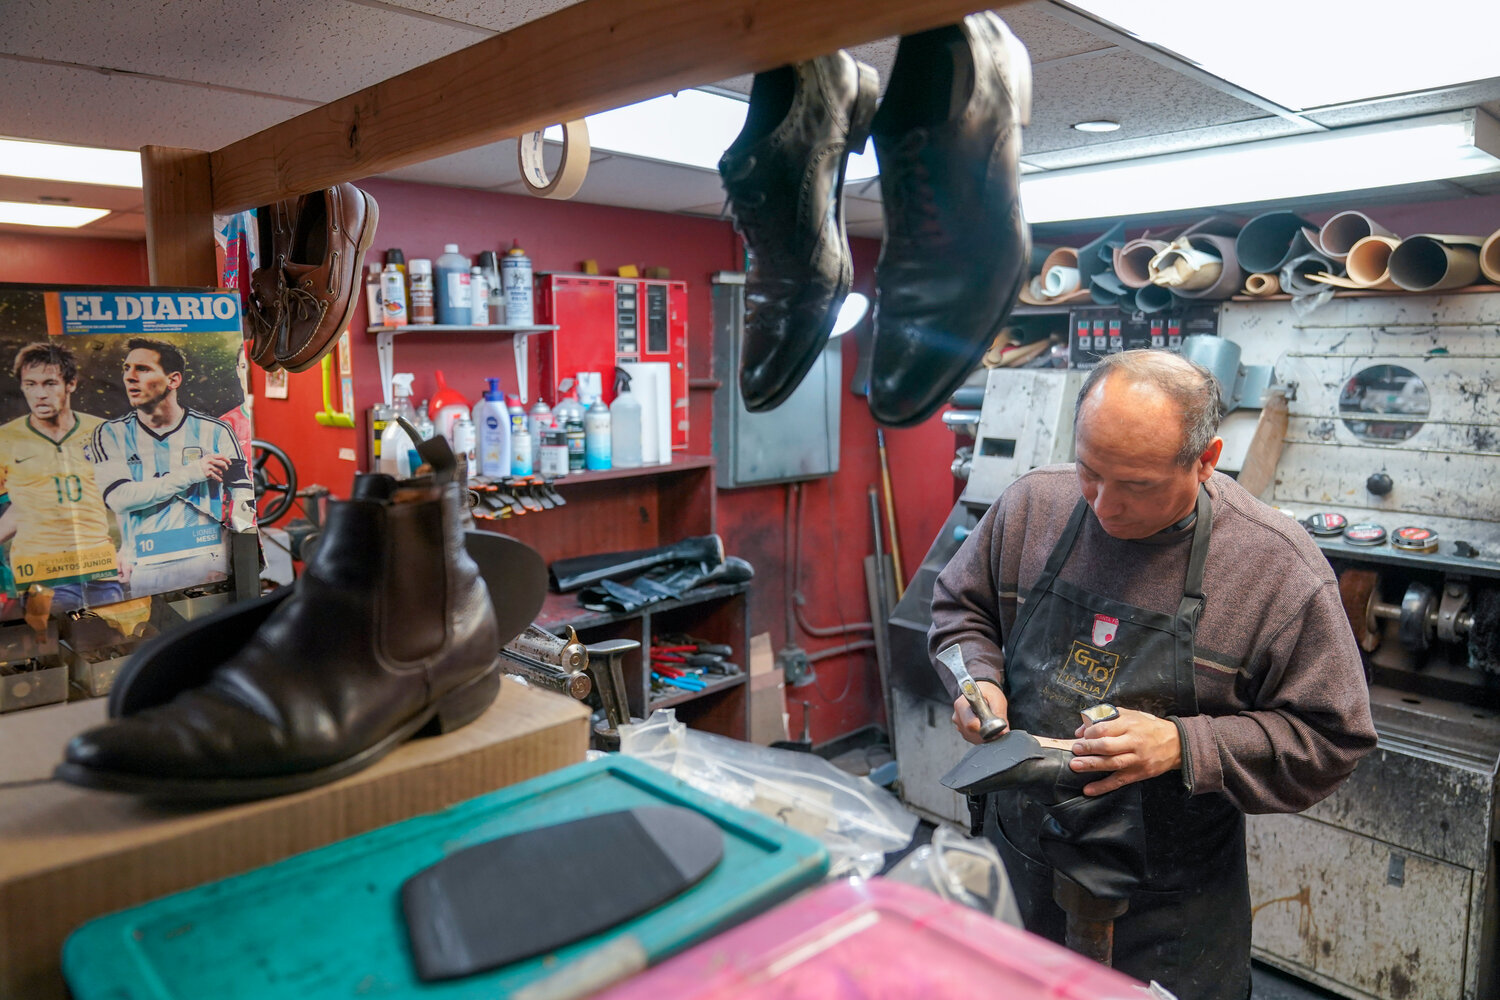 Shoe polish stands begin to vanish, lose their shine - The Chief